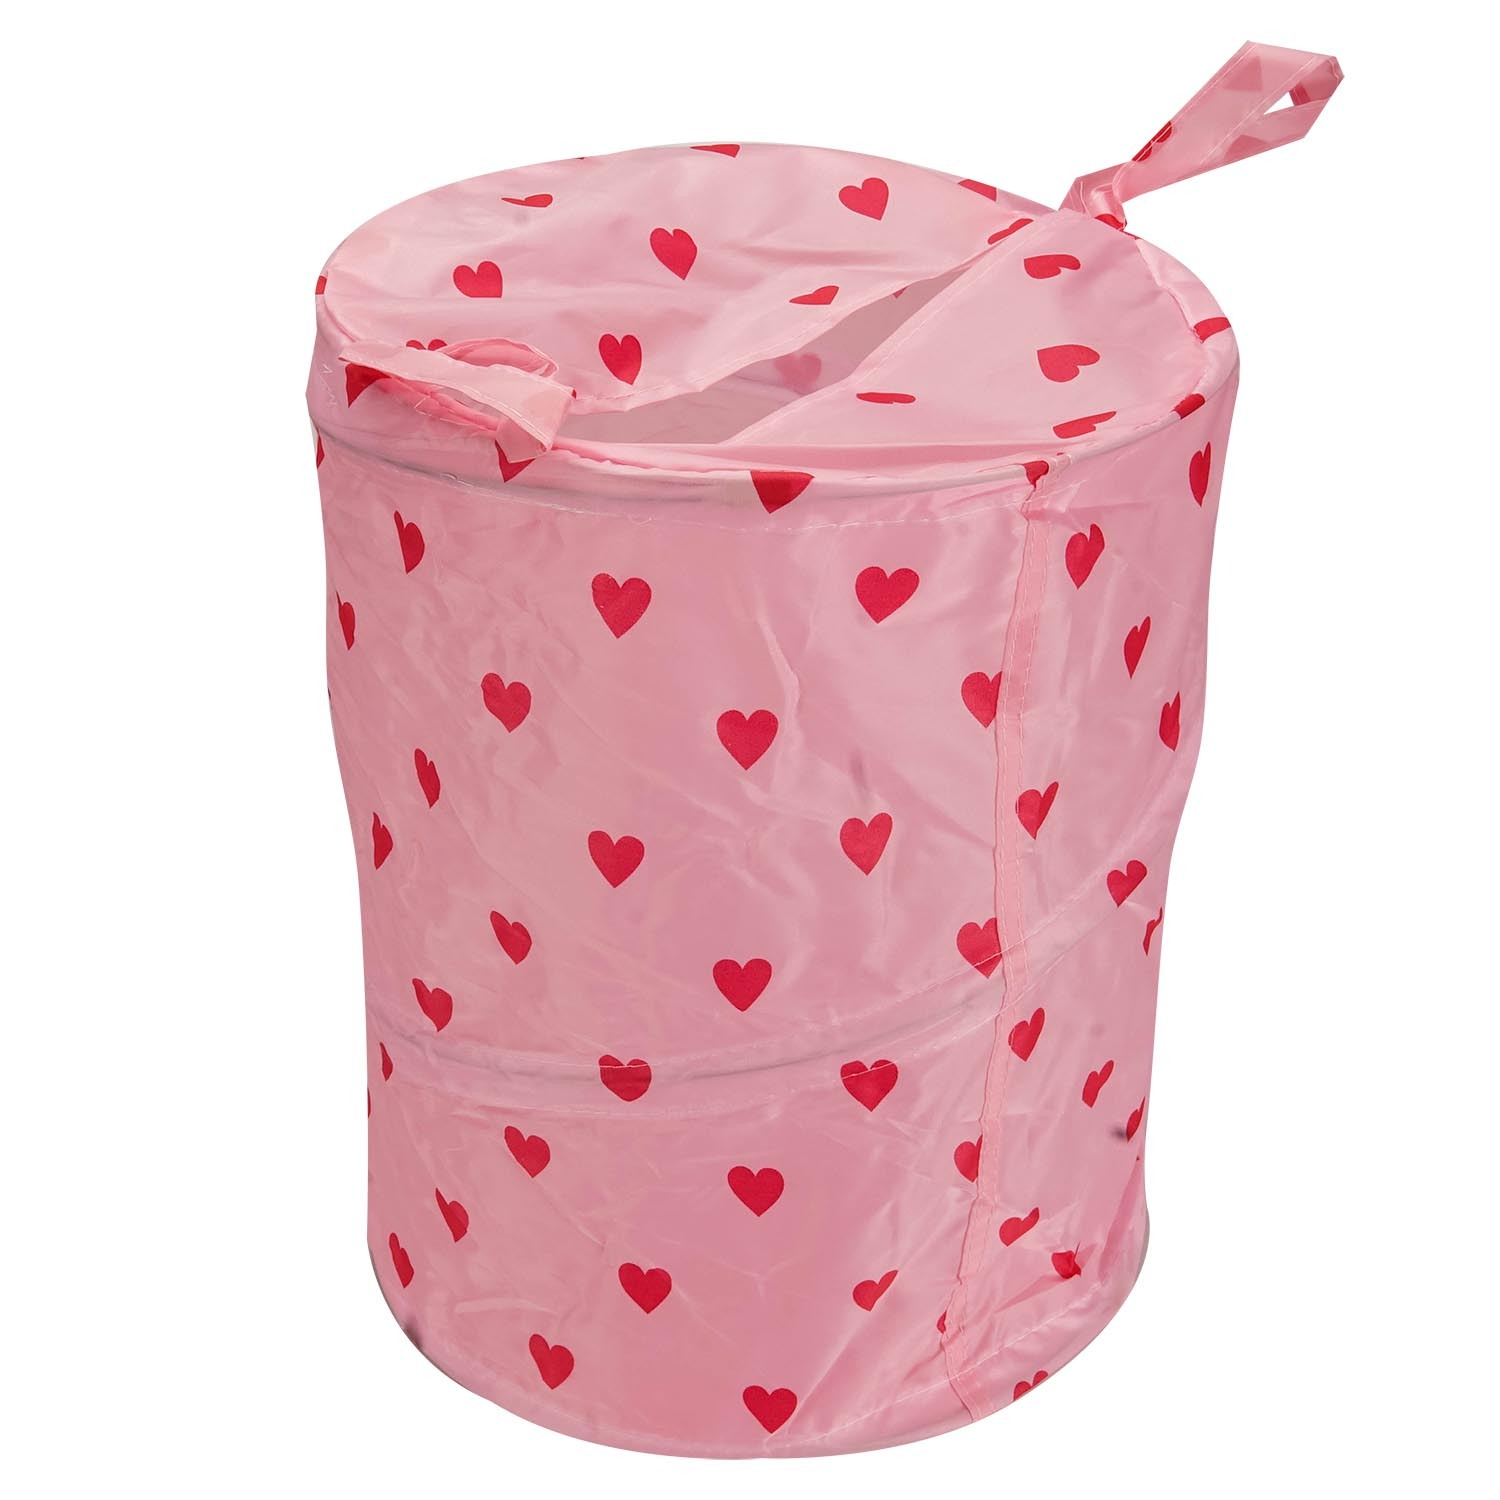 Single Kids Star or Heart Pop Up Laundry Hamper in Assorted styles Image 2